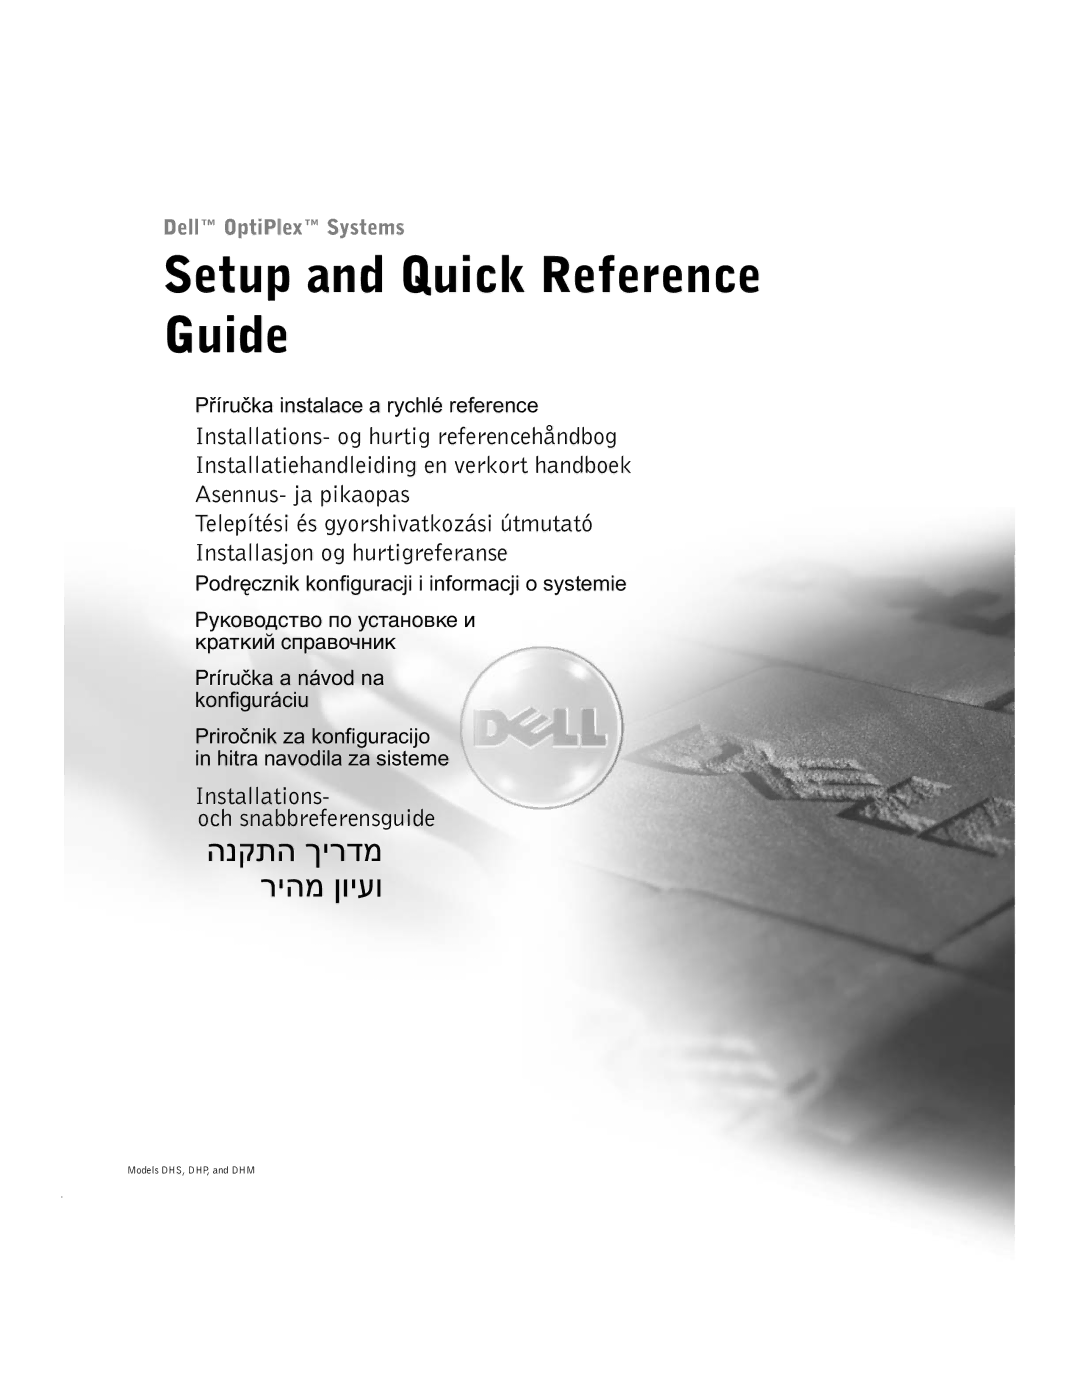 Dell GX60 manual Setup and Quick Reference Guide 